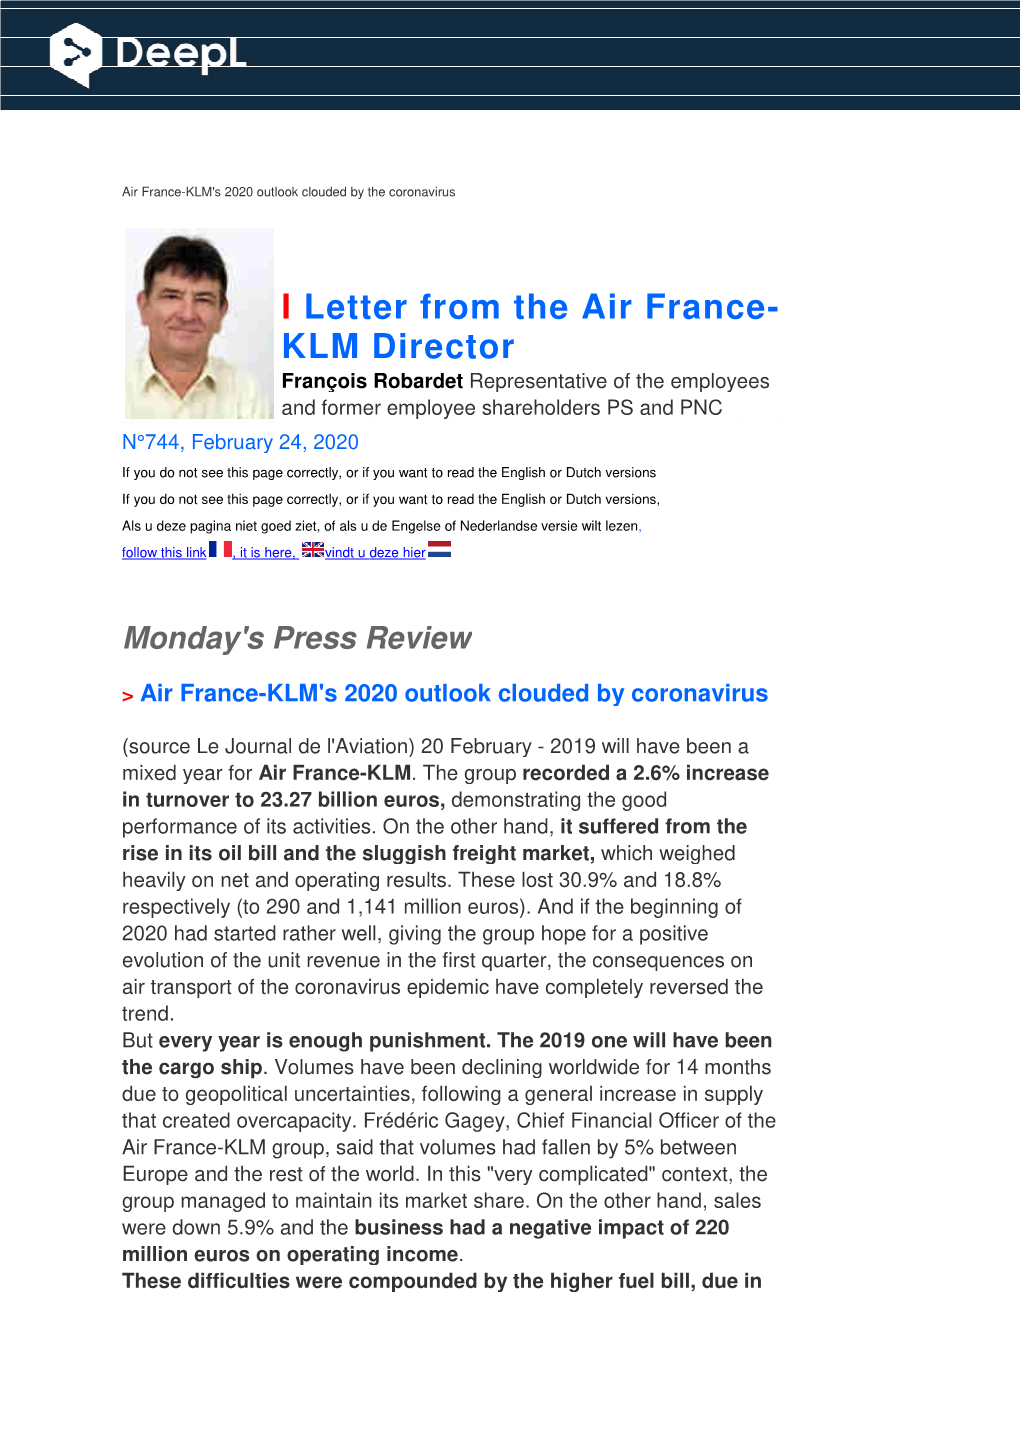 Air France-KLM's 2020 Outlook Clouded by the Coronavirus